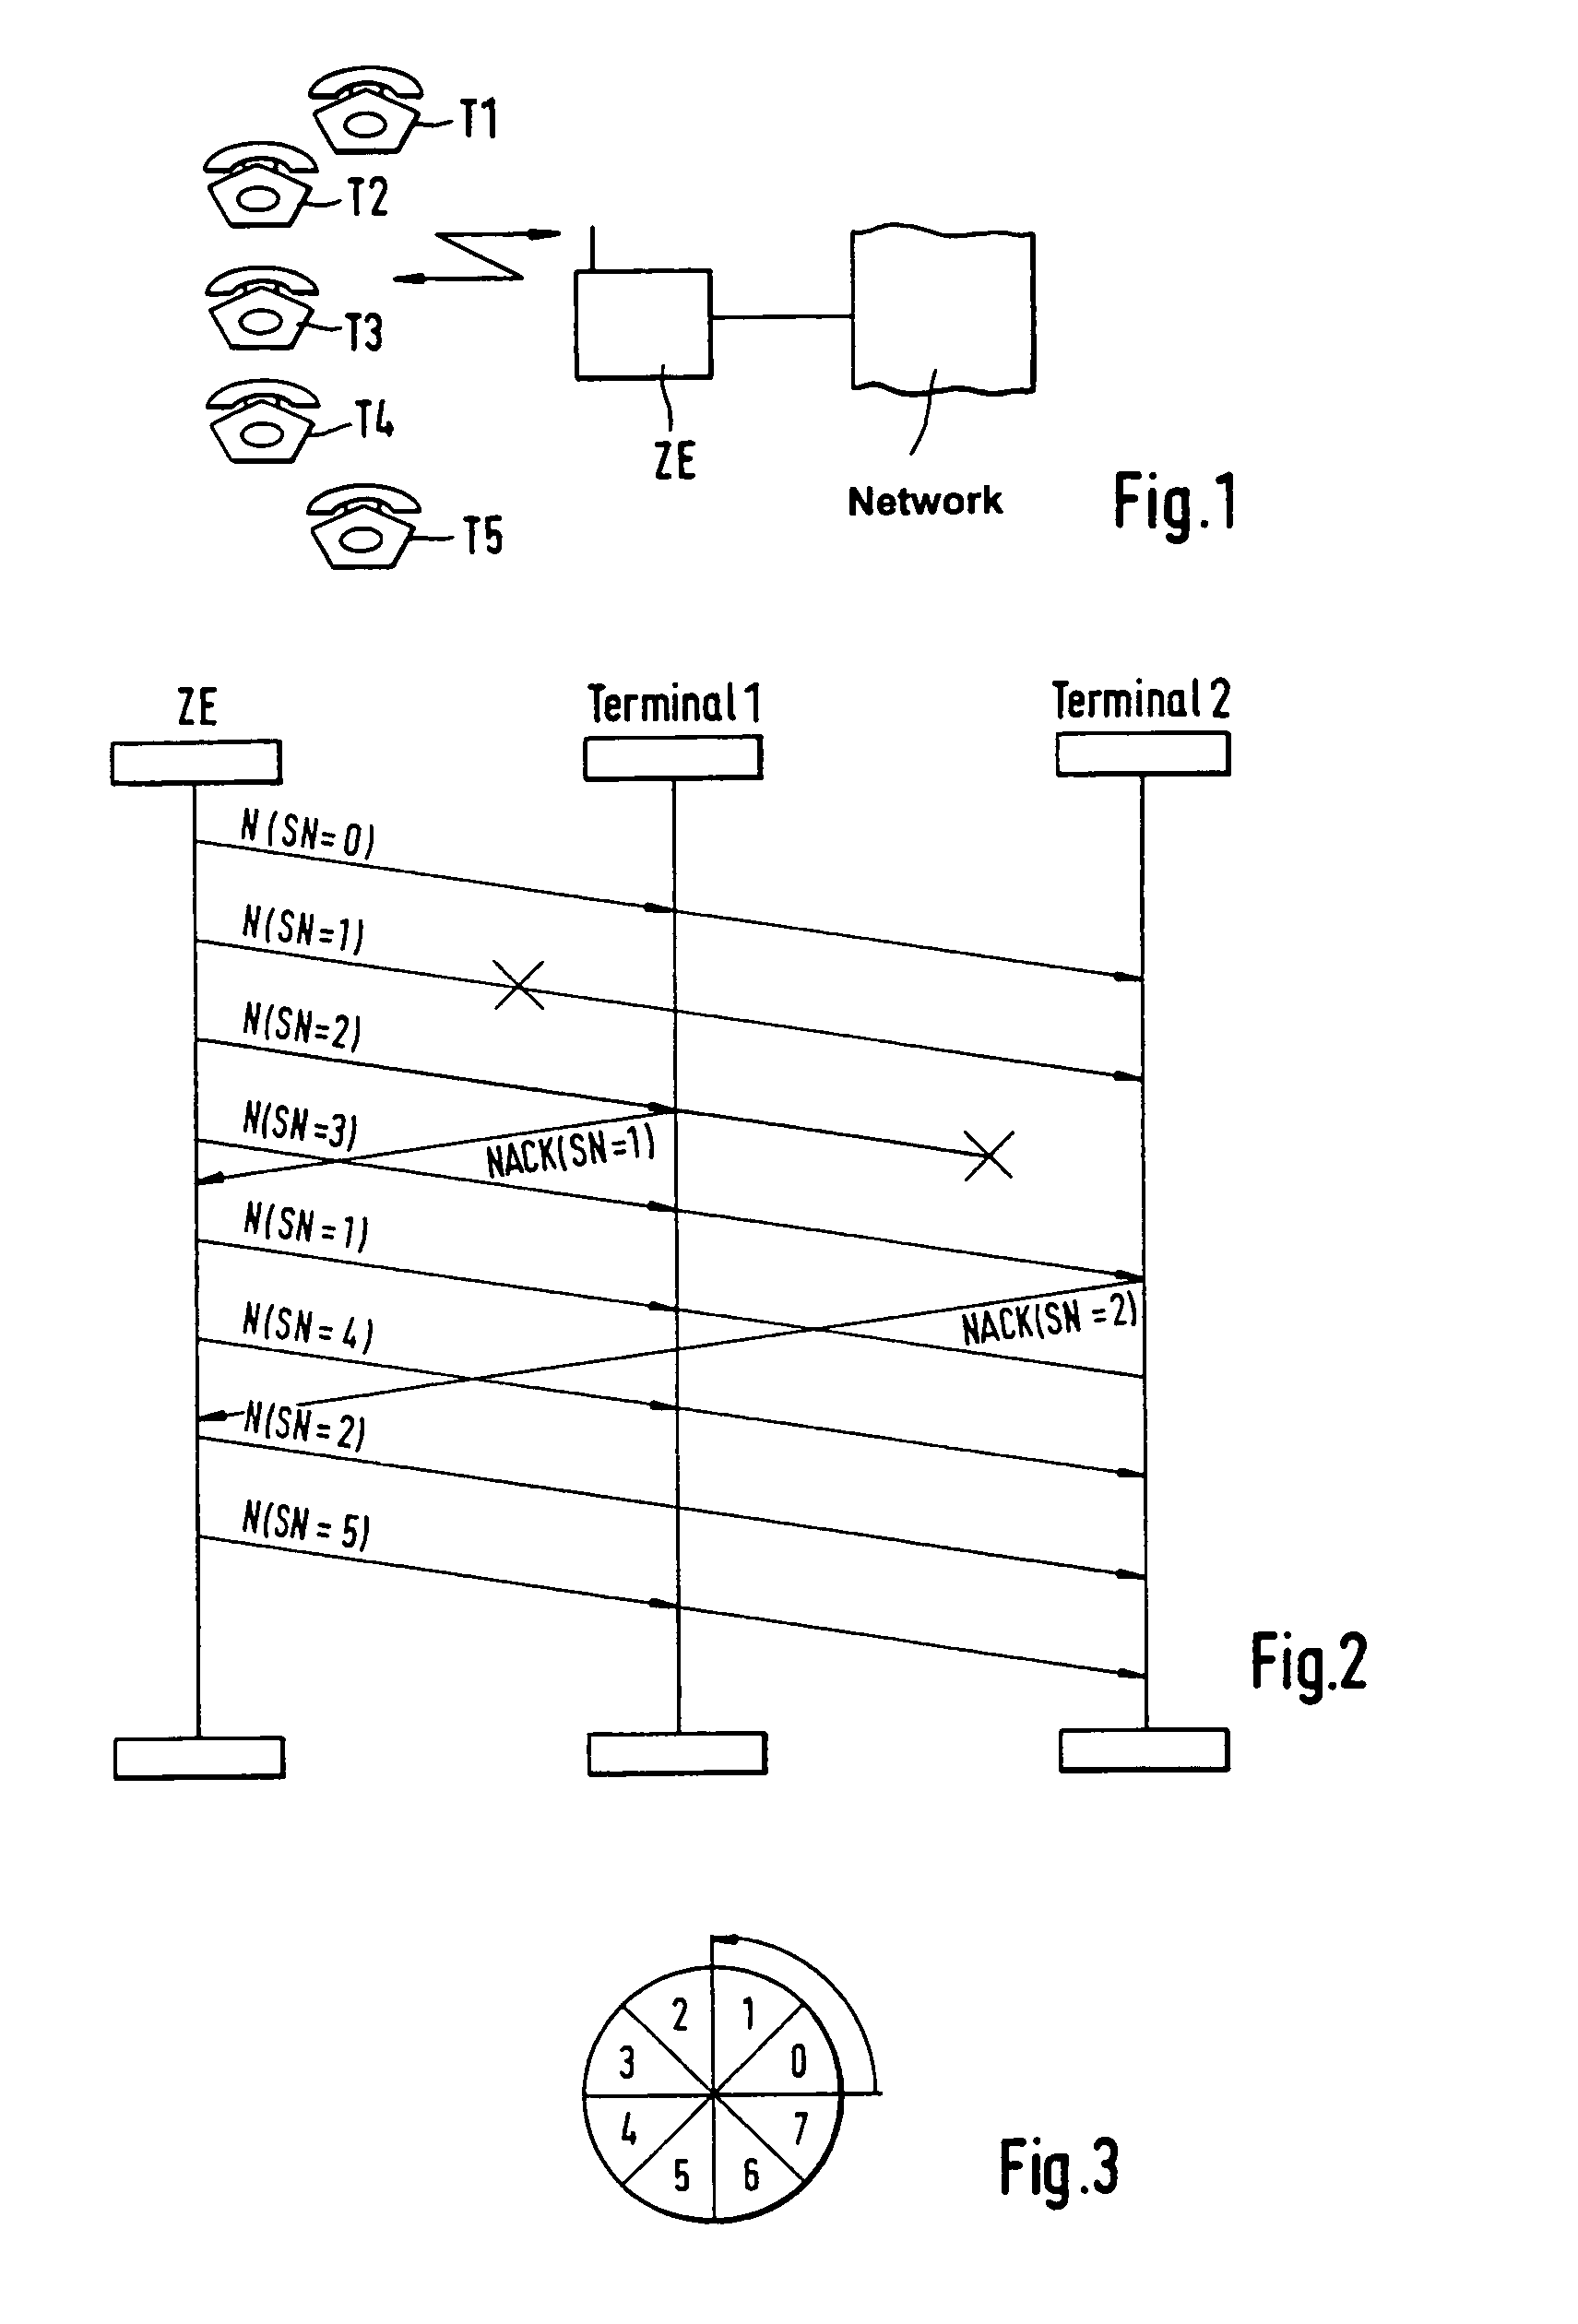 Method of repeat transmission of messages in a centrally controlled communication network